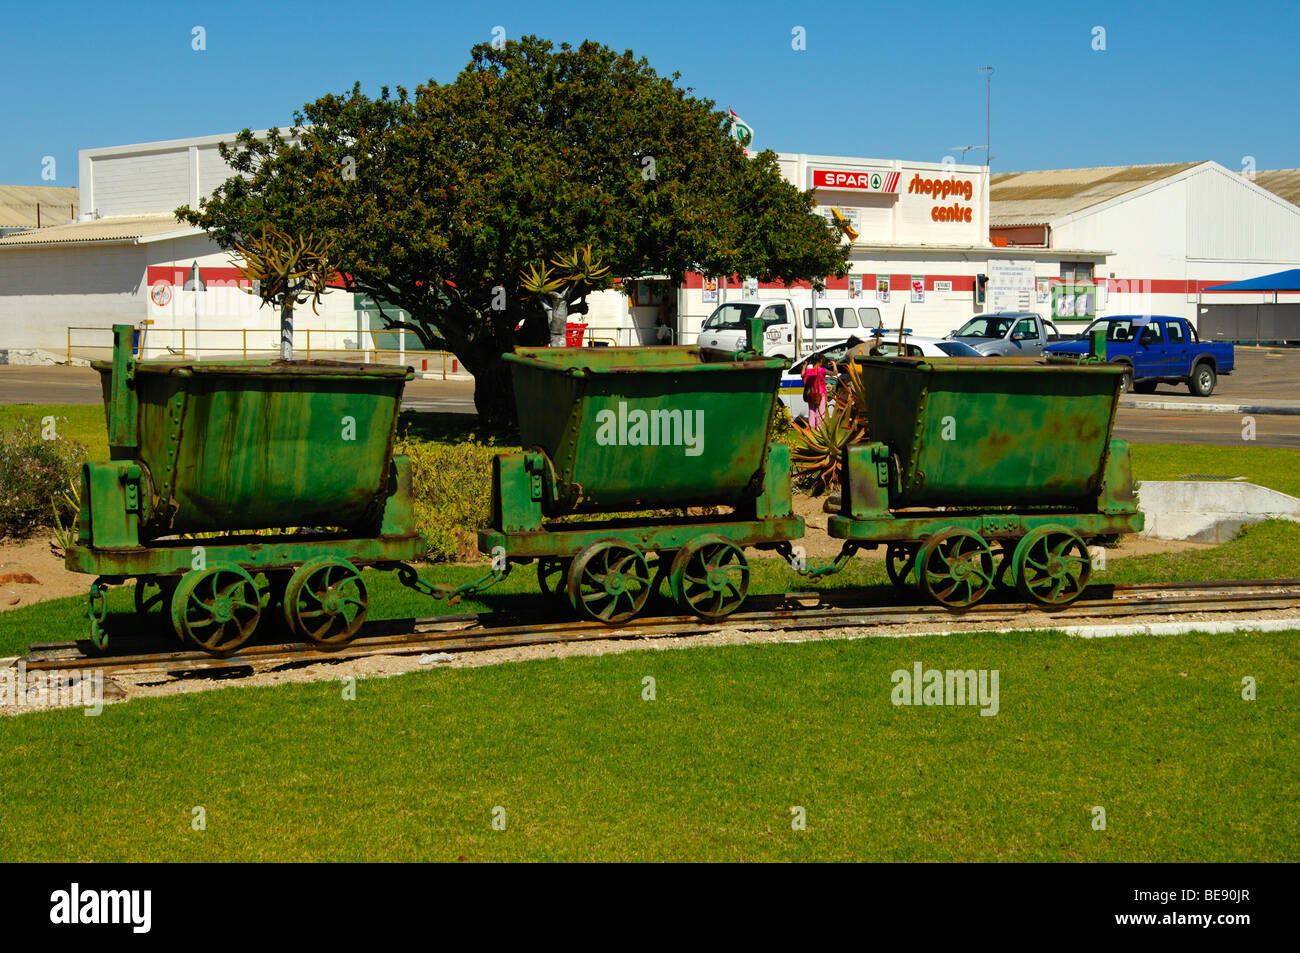 Old mine carts in front of the Spar Supermarket in the access-restricted De Beers diamond town Kleinzee, Northern Cape, South A Stock Photo